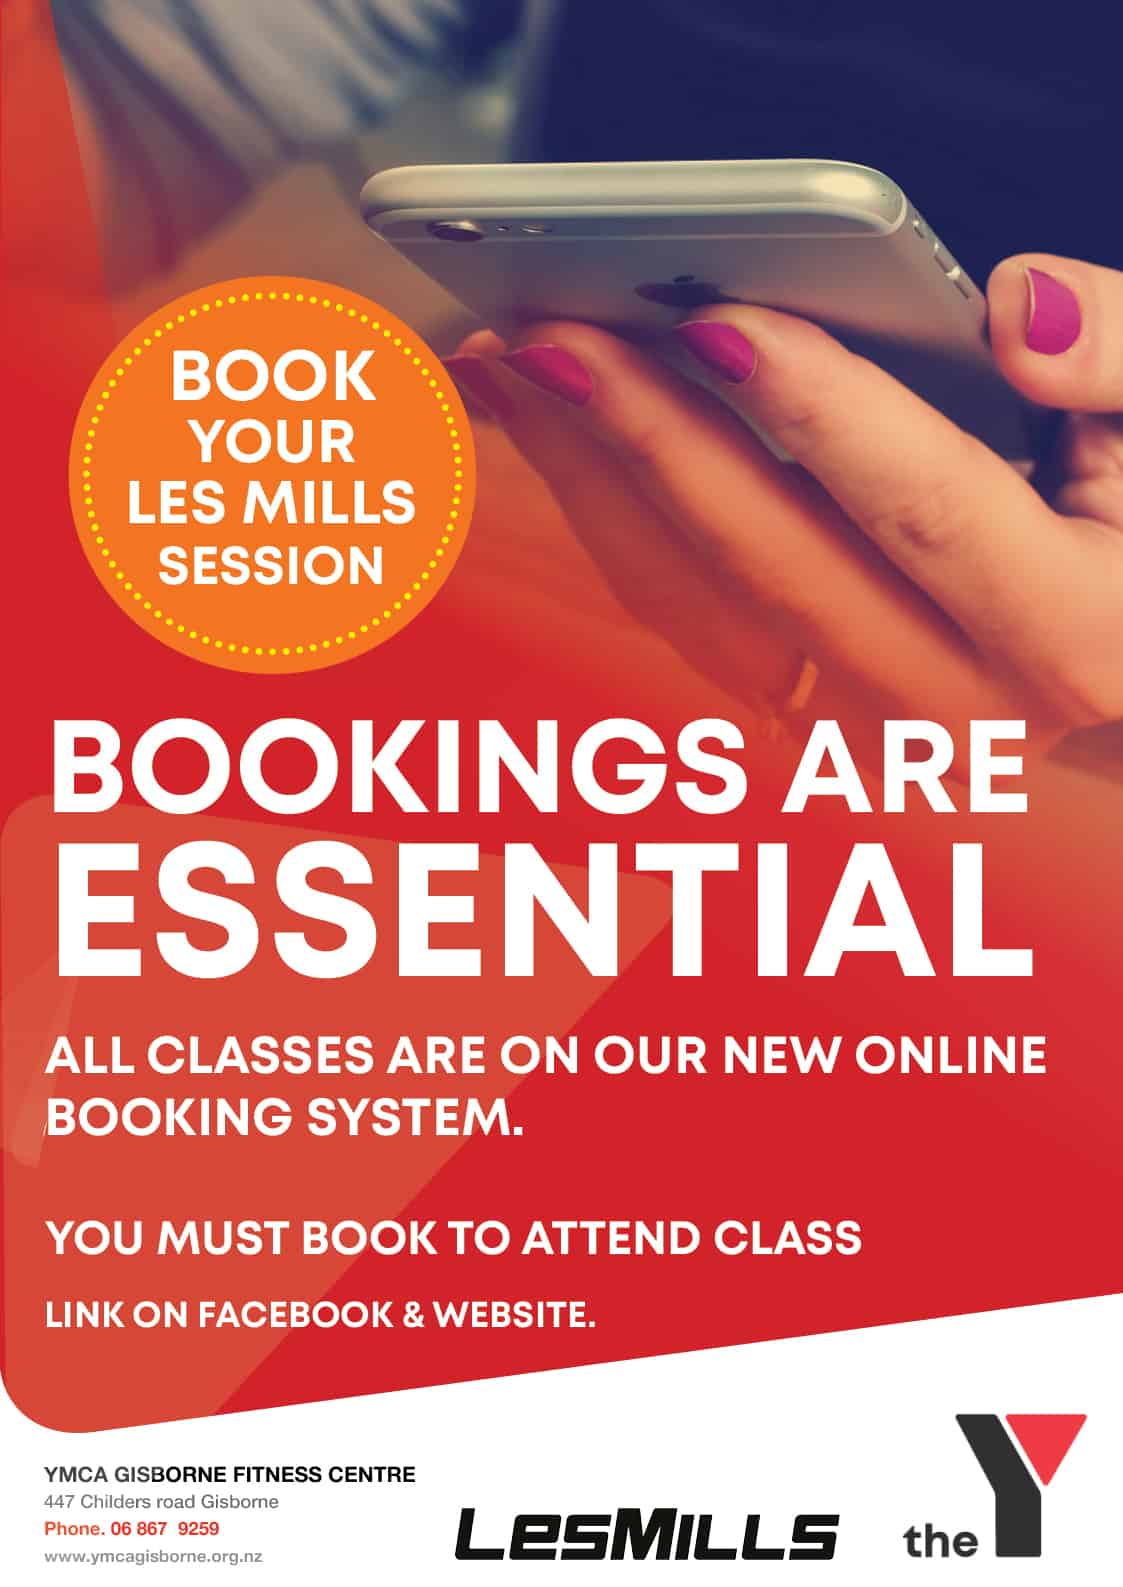 BOOKINGS FOR LES MILLS ESSENTIAL